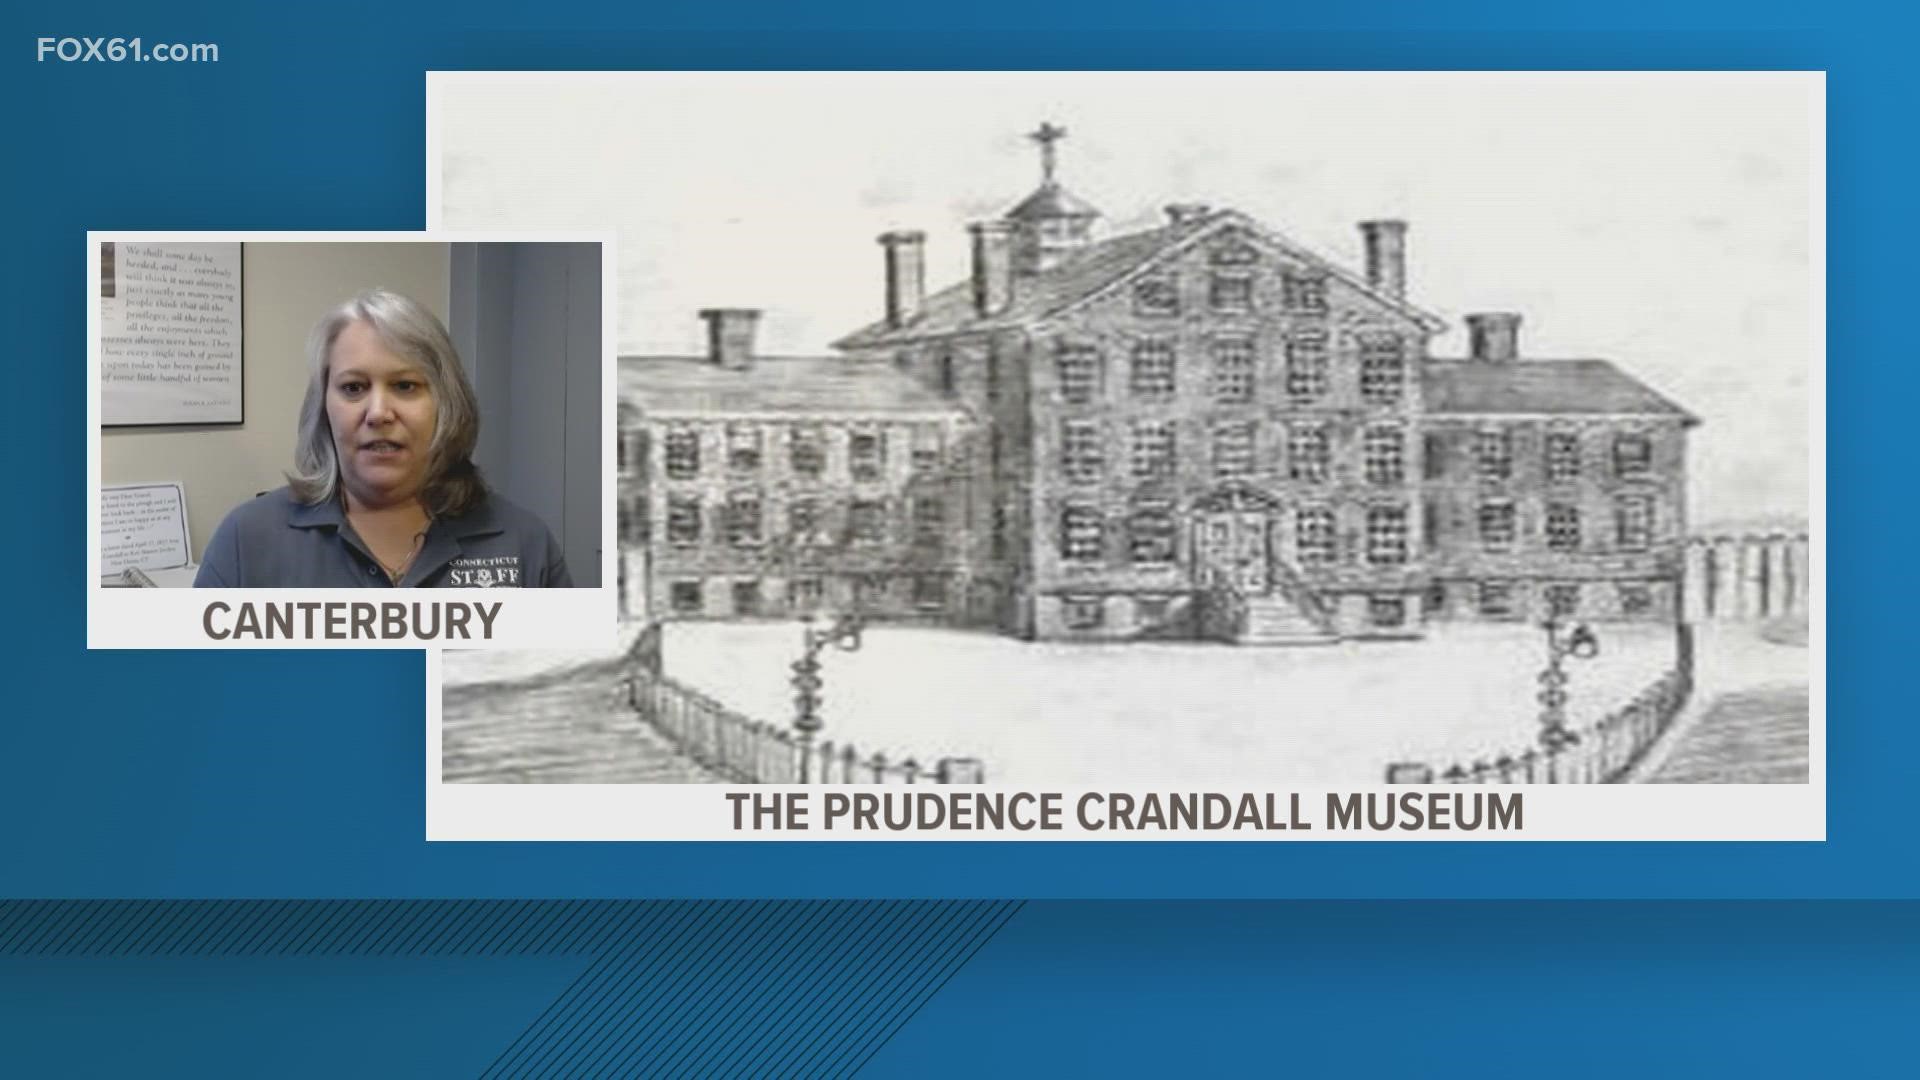 Crandell opened a boarding school in 1831 and incurred locals' wrath when Crandell admitted a 20-year-old African American woman into the school.